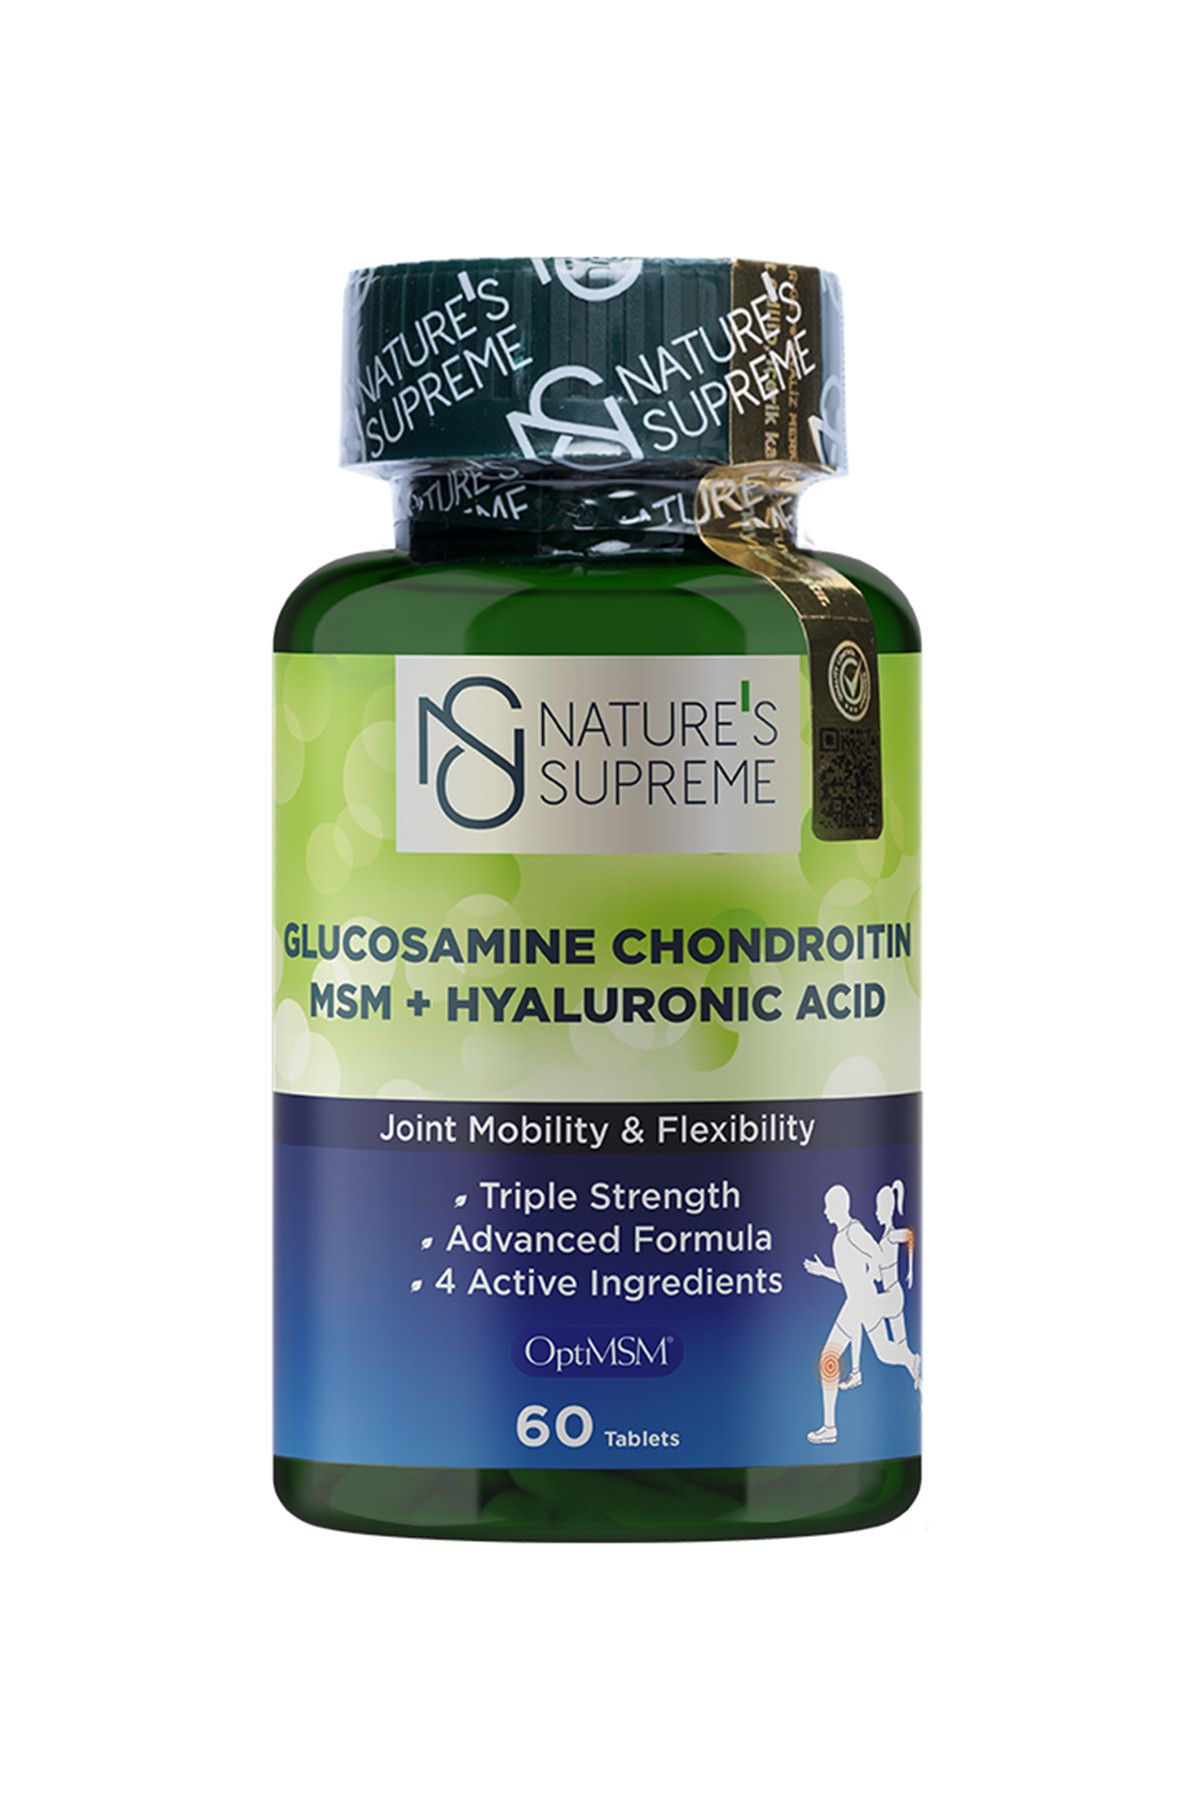 Natures Supreme Glucosamine Chondroitin MSM + Hyaluronic Acid 60 Tablet 8681763380435